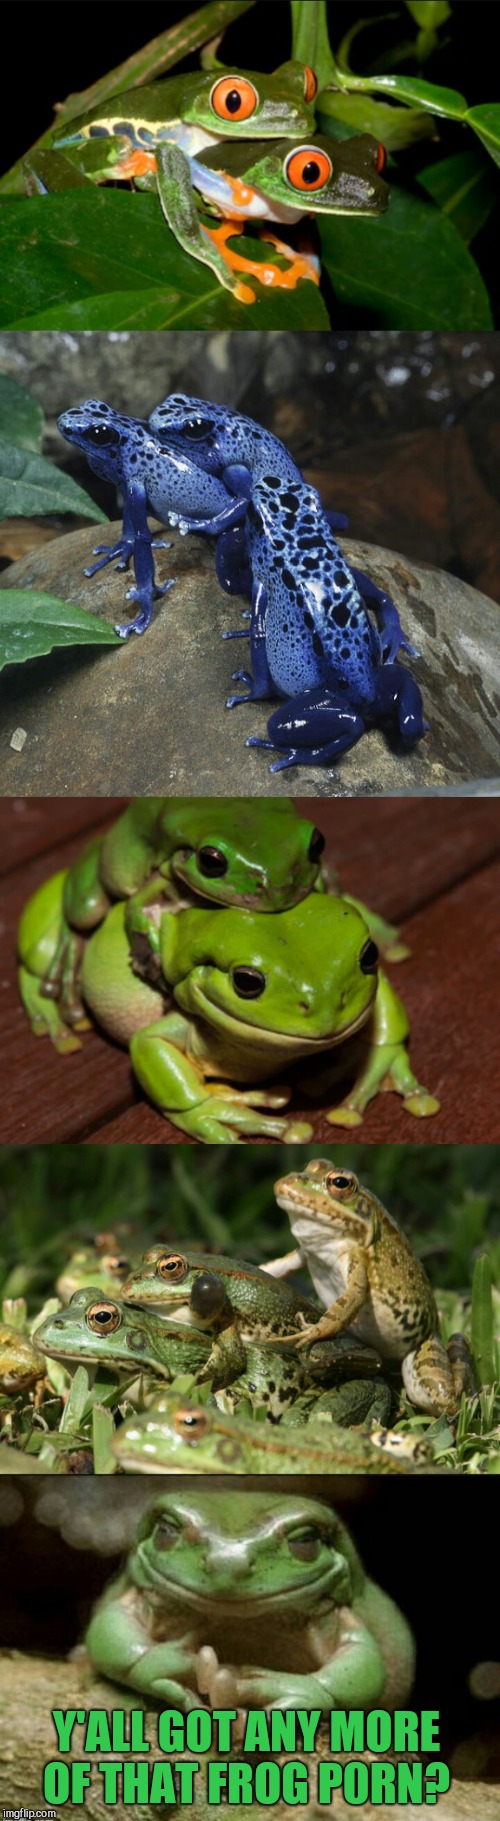 Frog Week, June 4-10, a JBmemegeek & giveuahint event!  | Y'ALL GOT ANY MORE OF THAT FROG P0RN? | image tagged in frog week,funny animals,jbmemegeek,giveuahint,memes,frogs | made w/ Imgflip meme maker